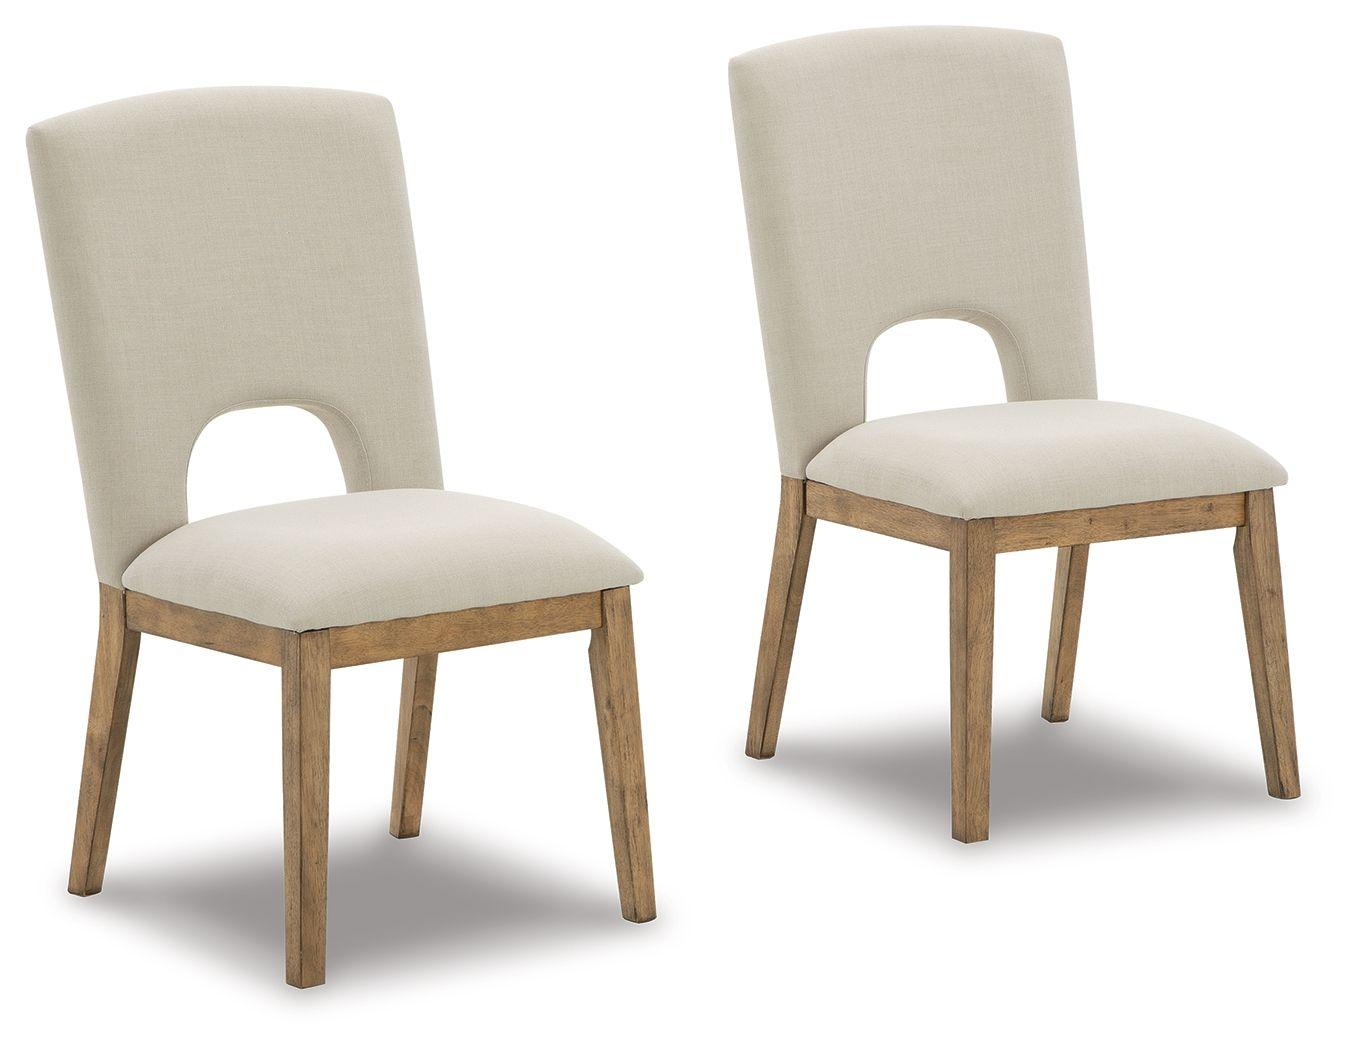 Signature Design by Ashley® - Dakmore - Linen / Brown - Dining Uph Side Chair (Set of 2) - 5th Avenue Furniture